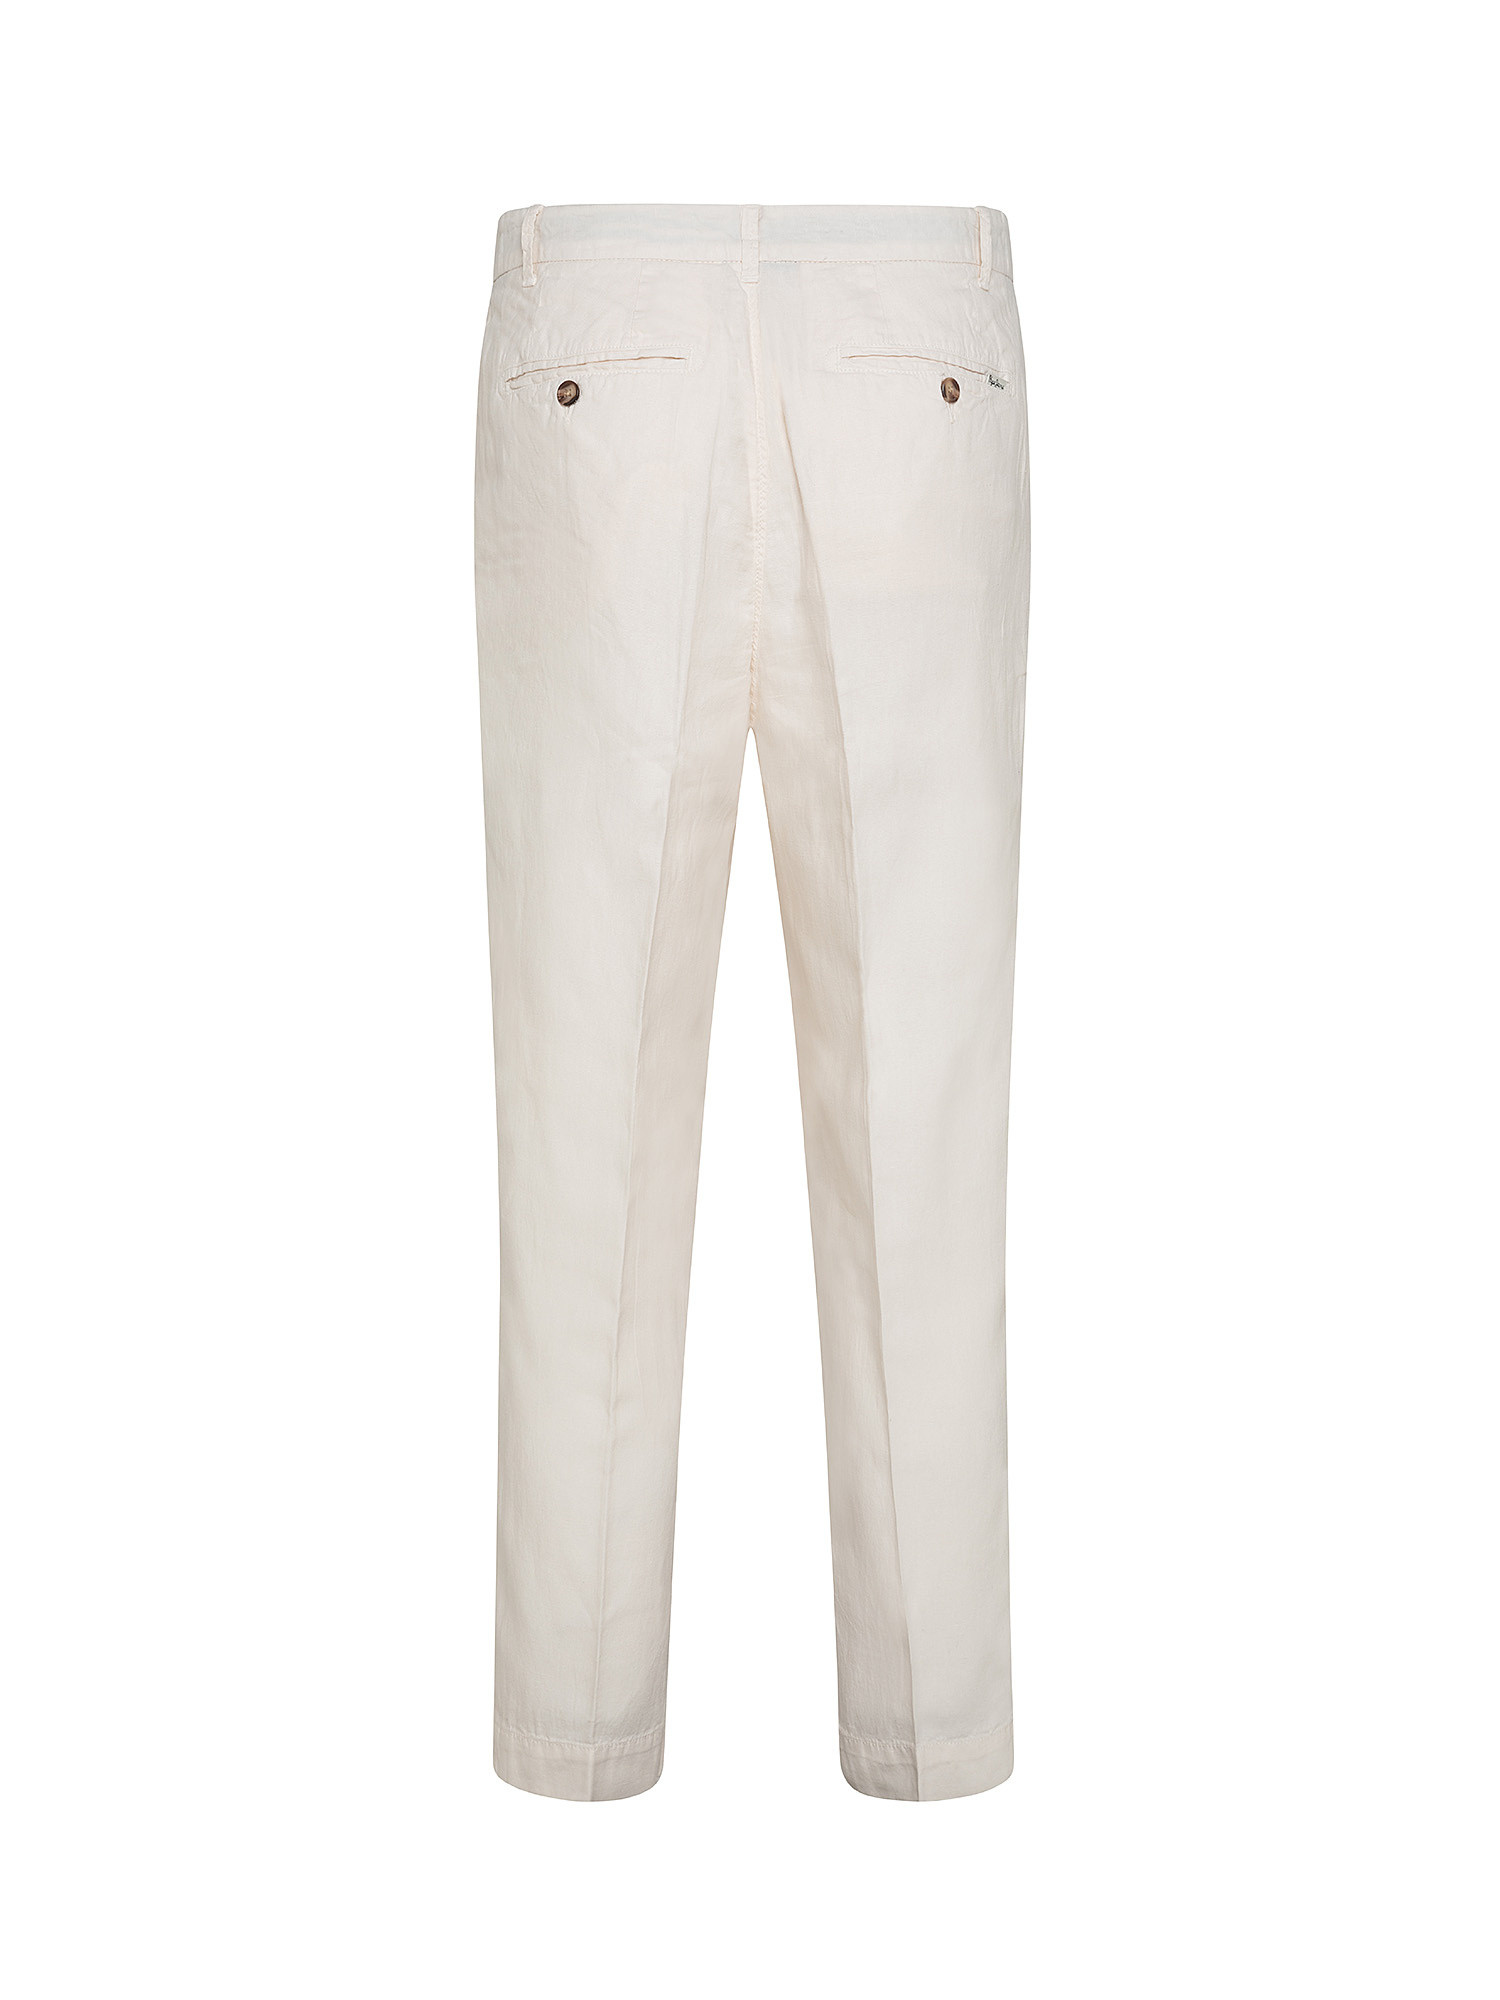 Linen blend trousers, White Cream, large image number 1